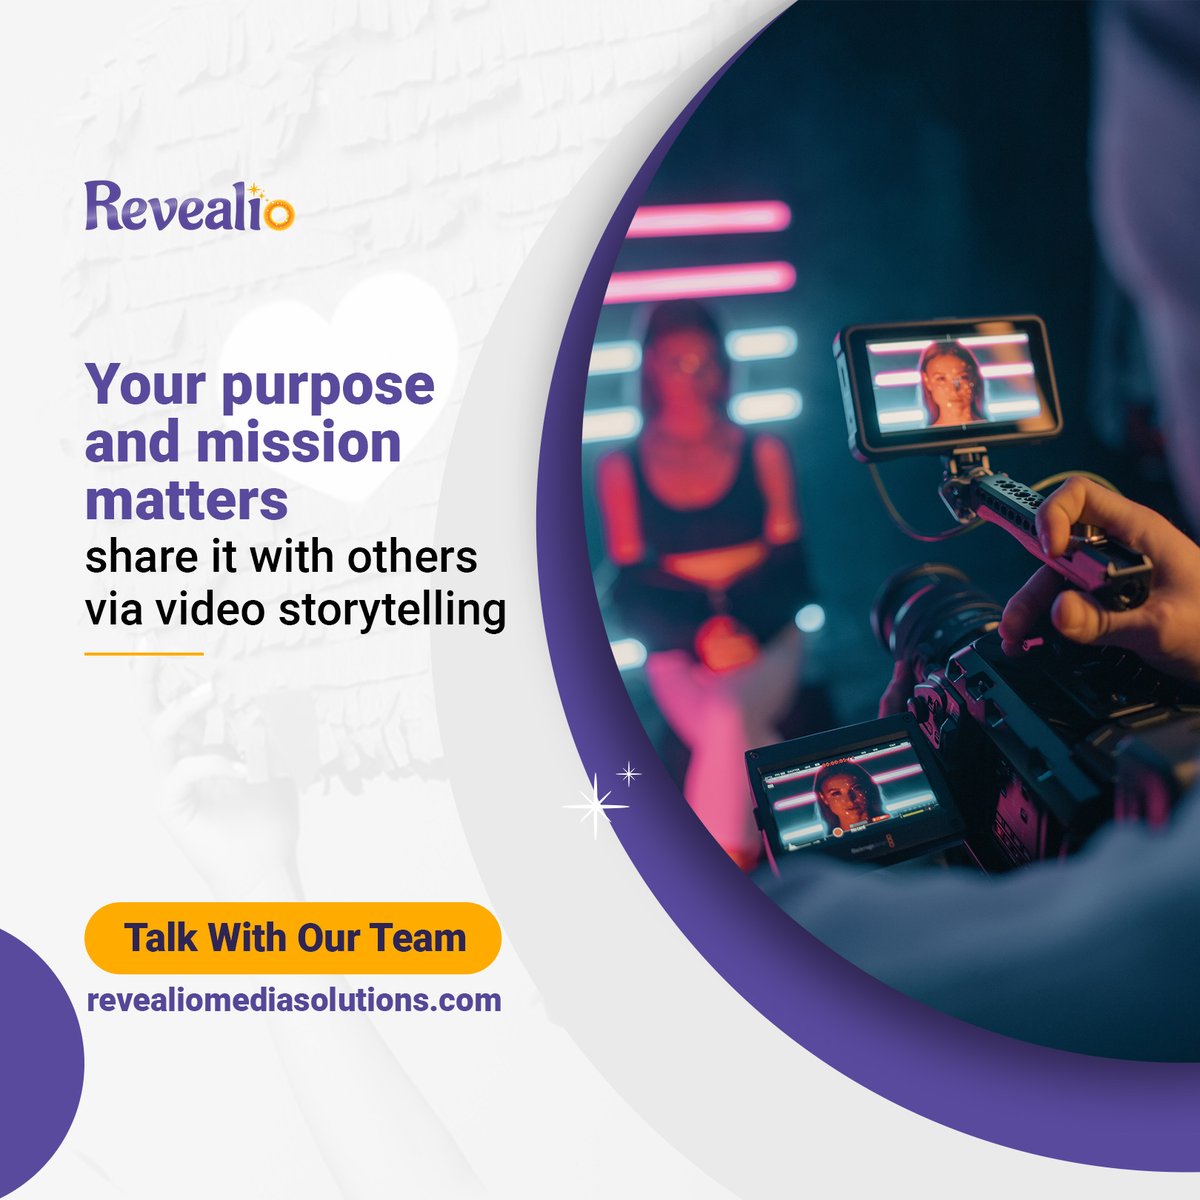 Your purpose matters and our team knows it! Let it shine!

Follow us to know more!

#video #story #videostorytelling #smallbusinessvideo #nonprofitvideo #purposedriven #innovativestorytelling #revealio #uniquebusiness #storytelling #shortvideo